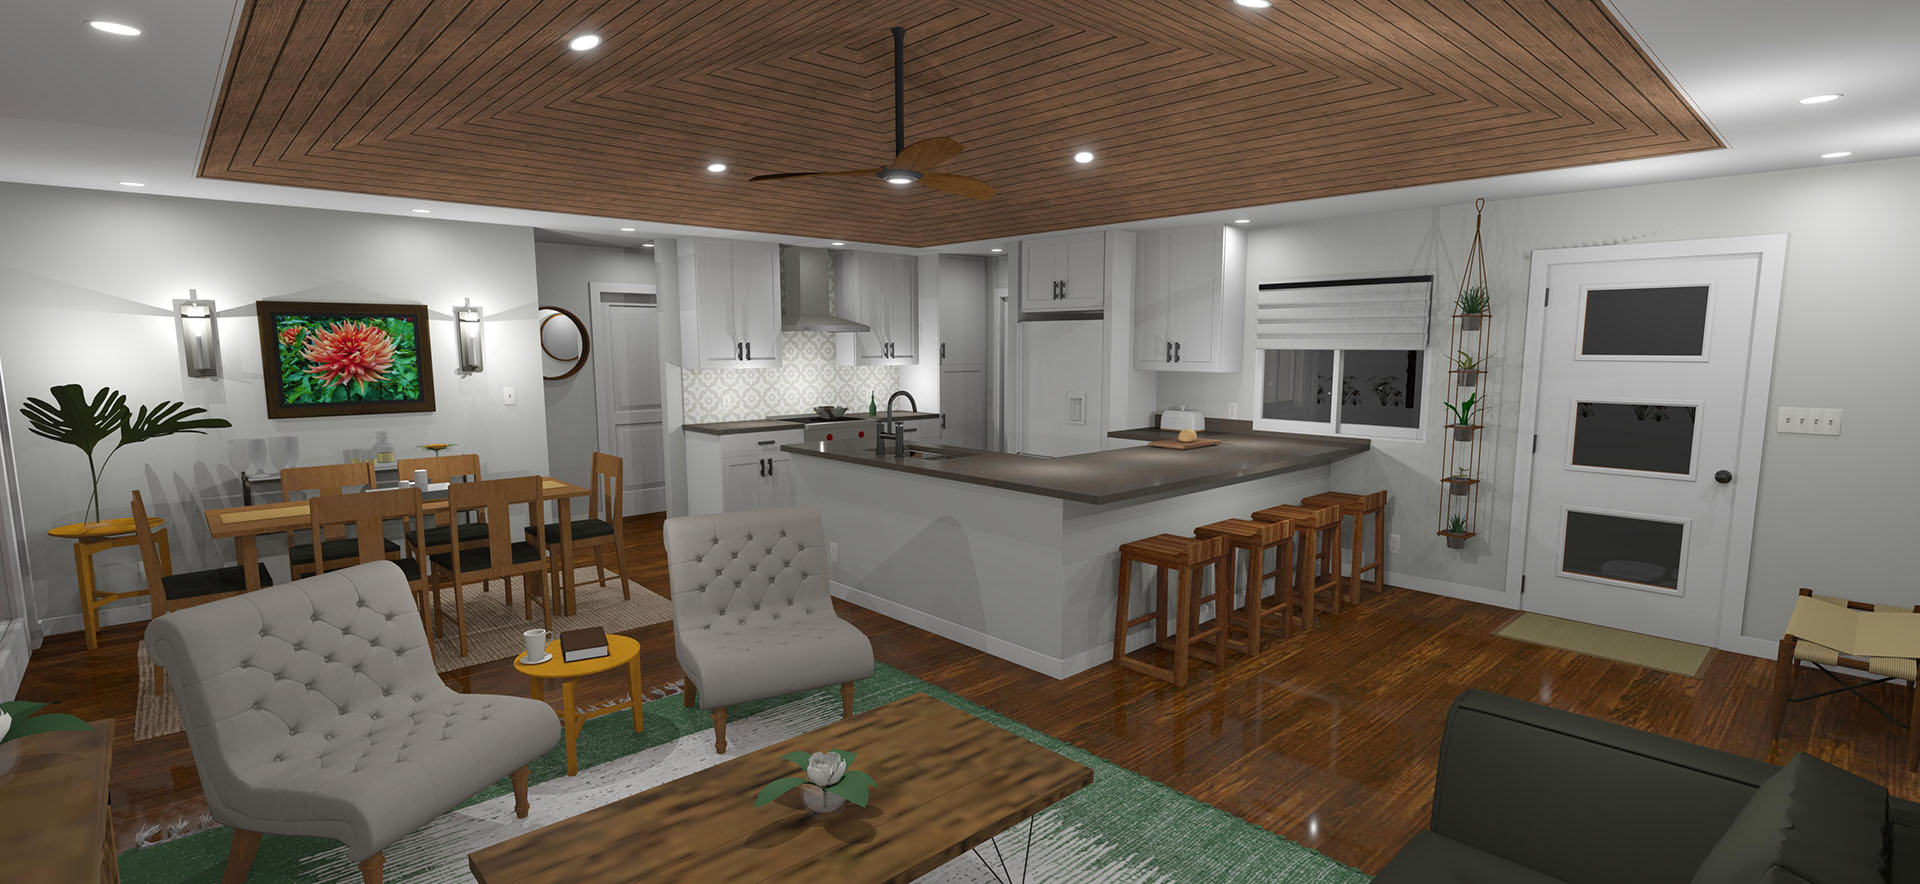 Interior of house showing kitchen area, dining area and part of living room